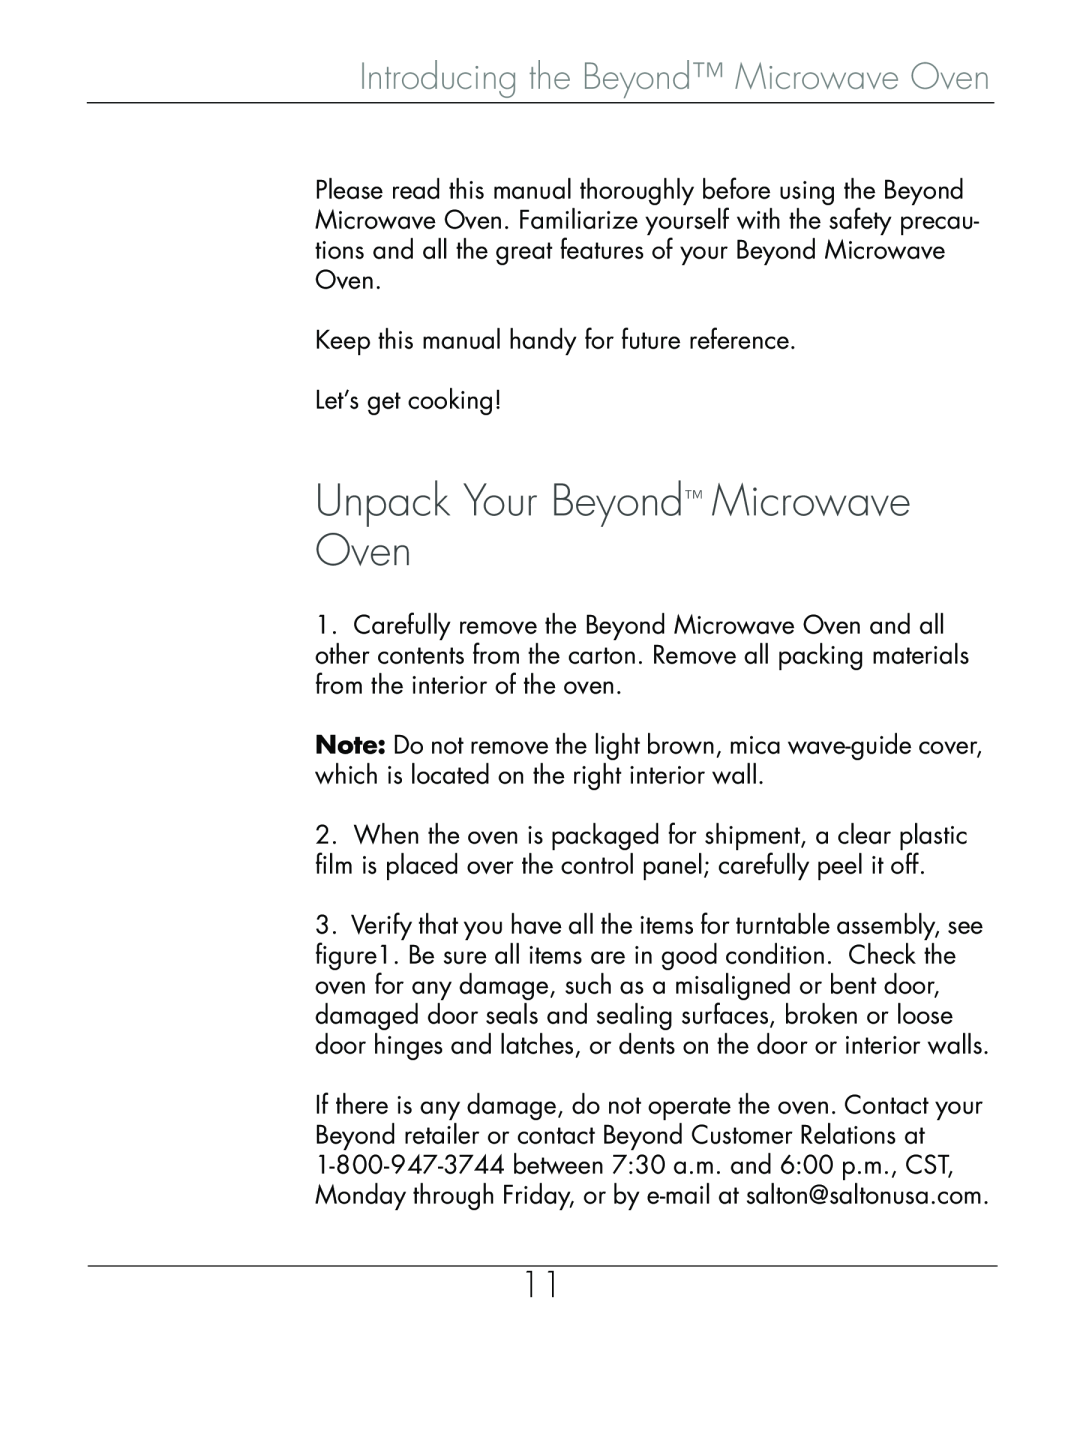 Beyond Microwace Oven manual Unpack Your Beyond Microwave Oven, Introducing the Beyond Microwave Oven 